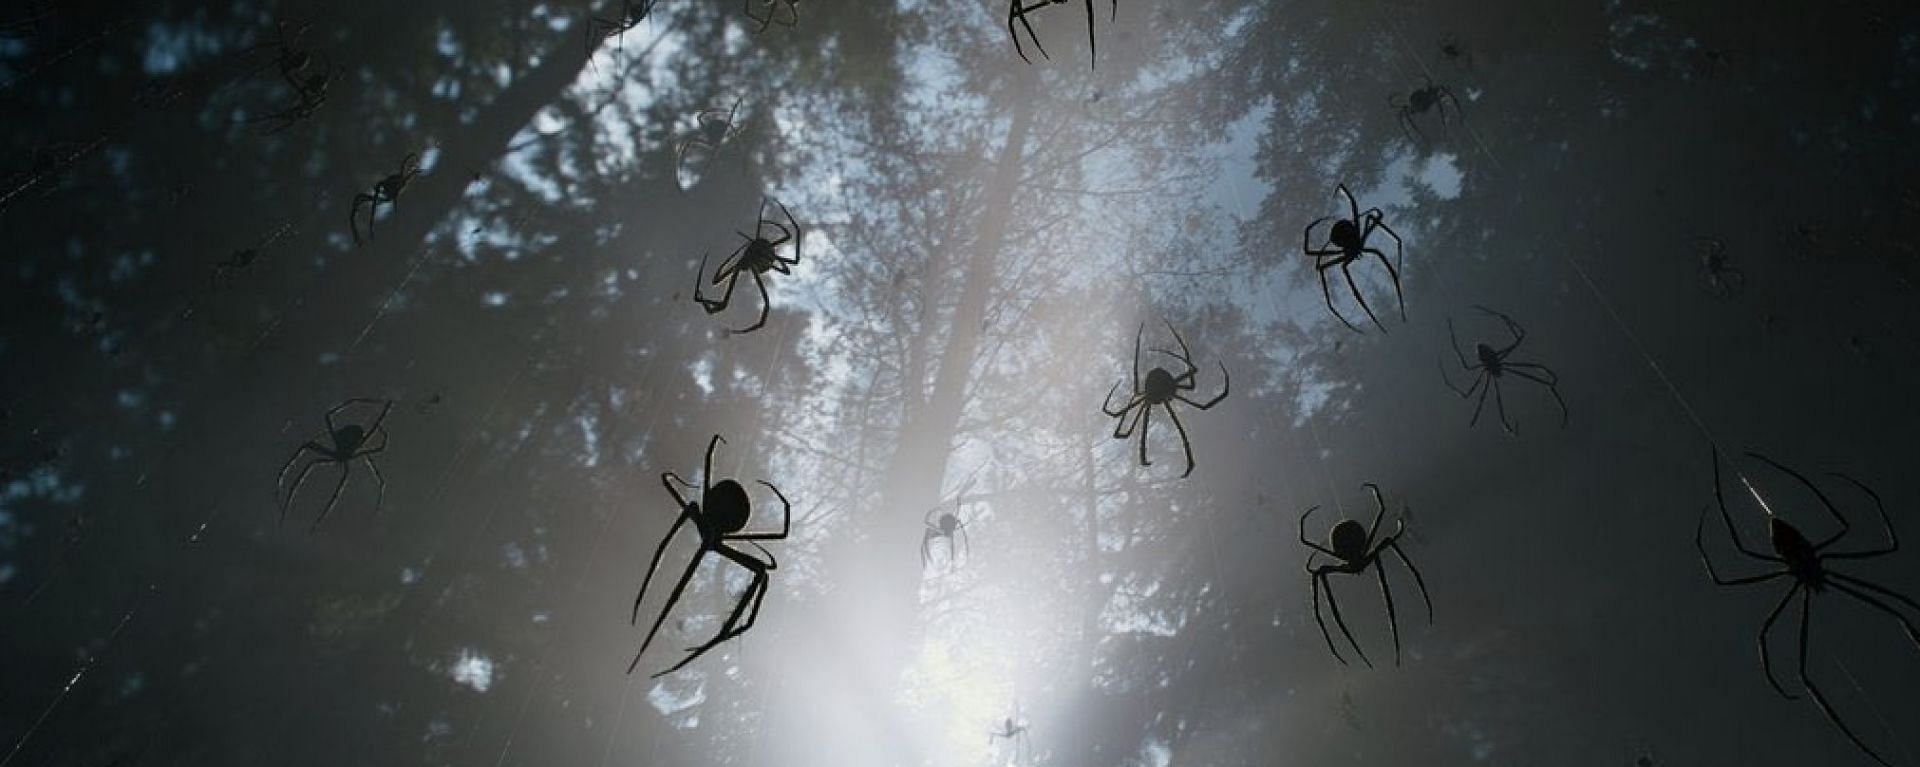 Ensnared by fear: Kraven battles his arachnophobia in a web of nightmares (Image via Sony Pictures)